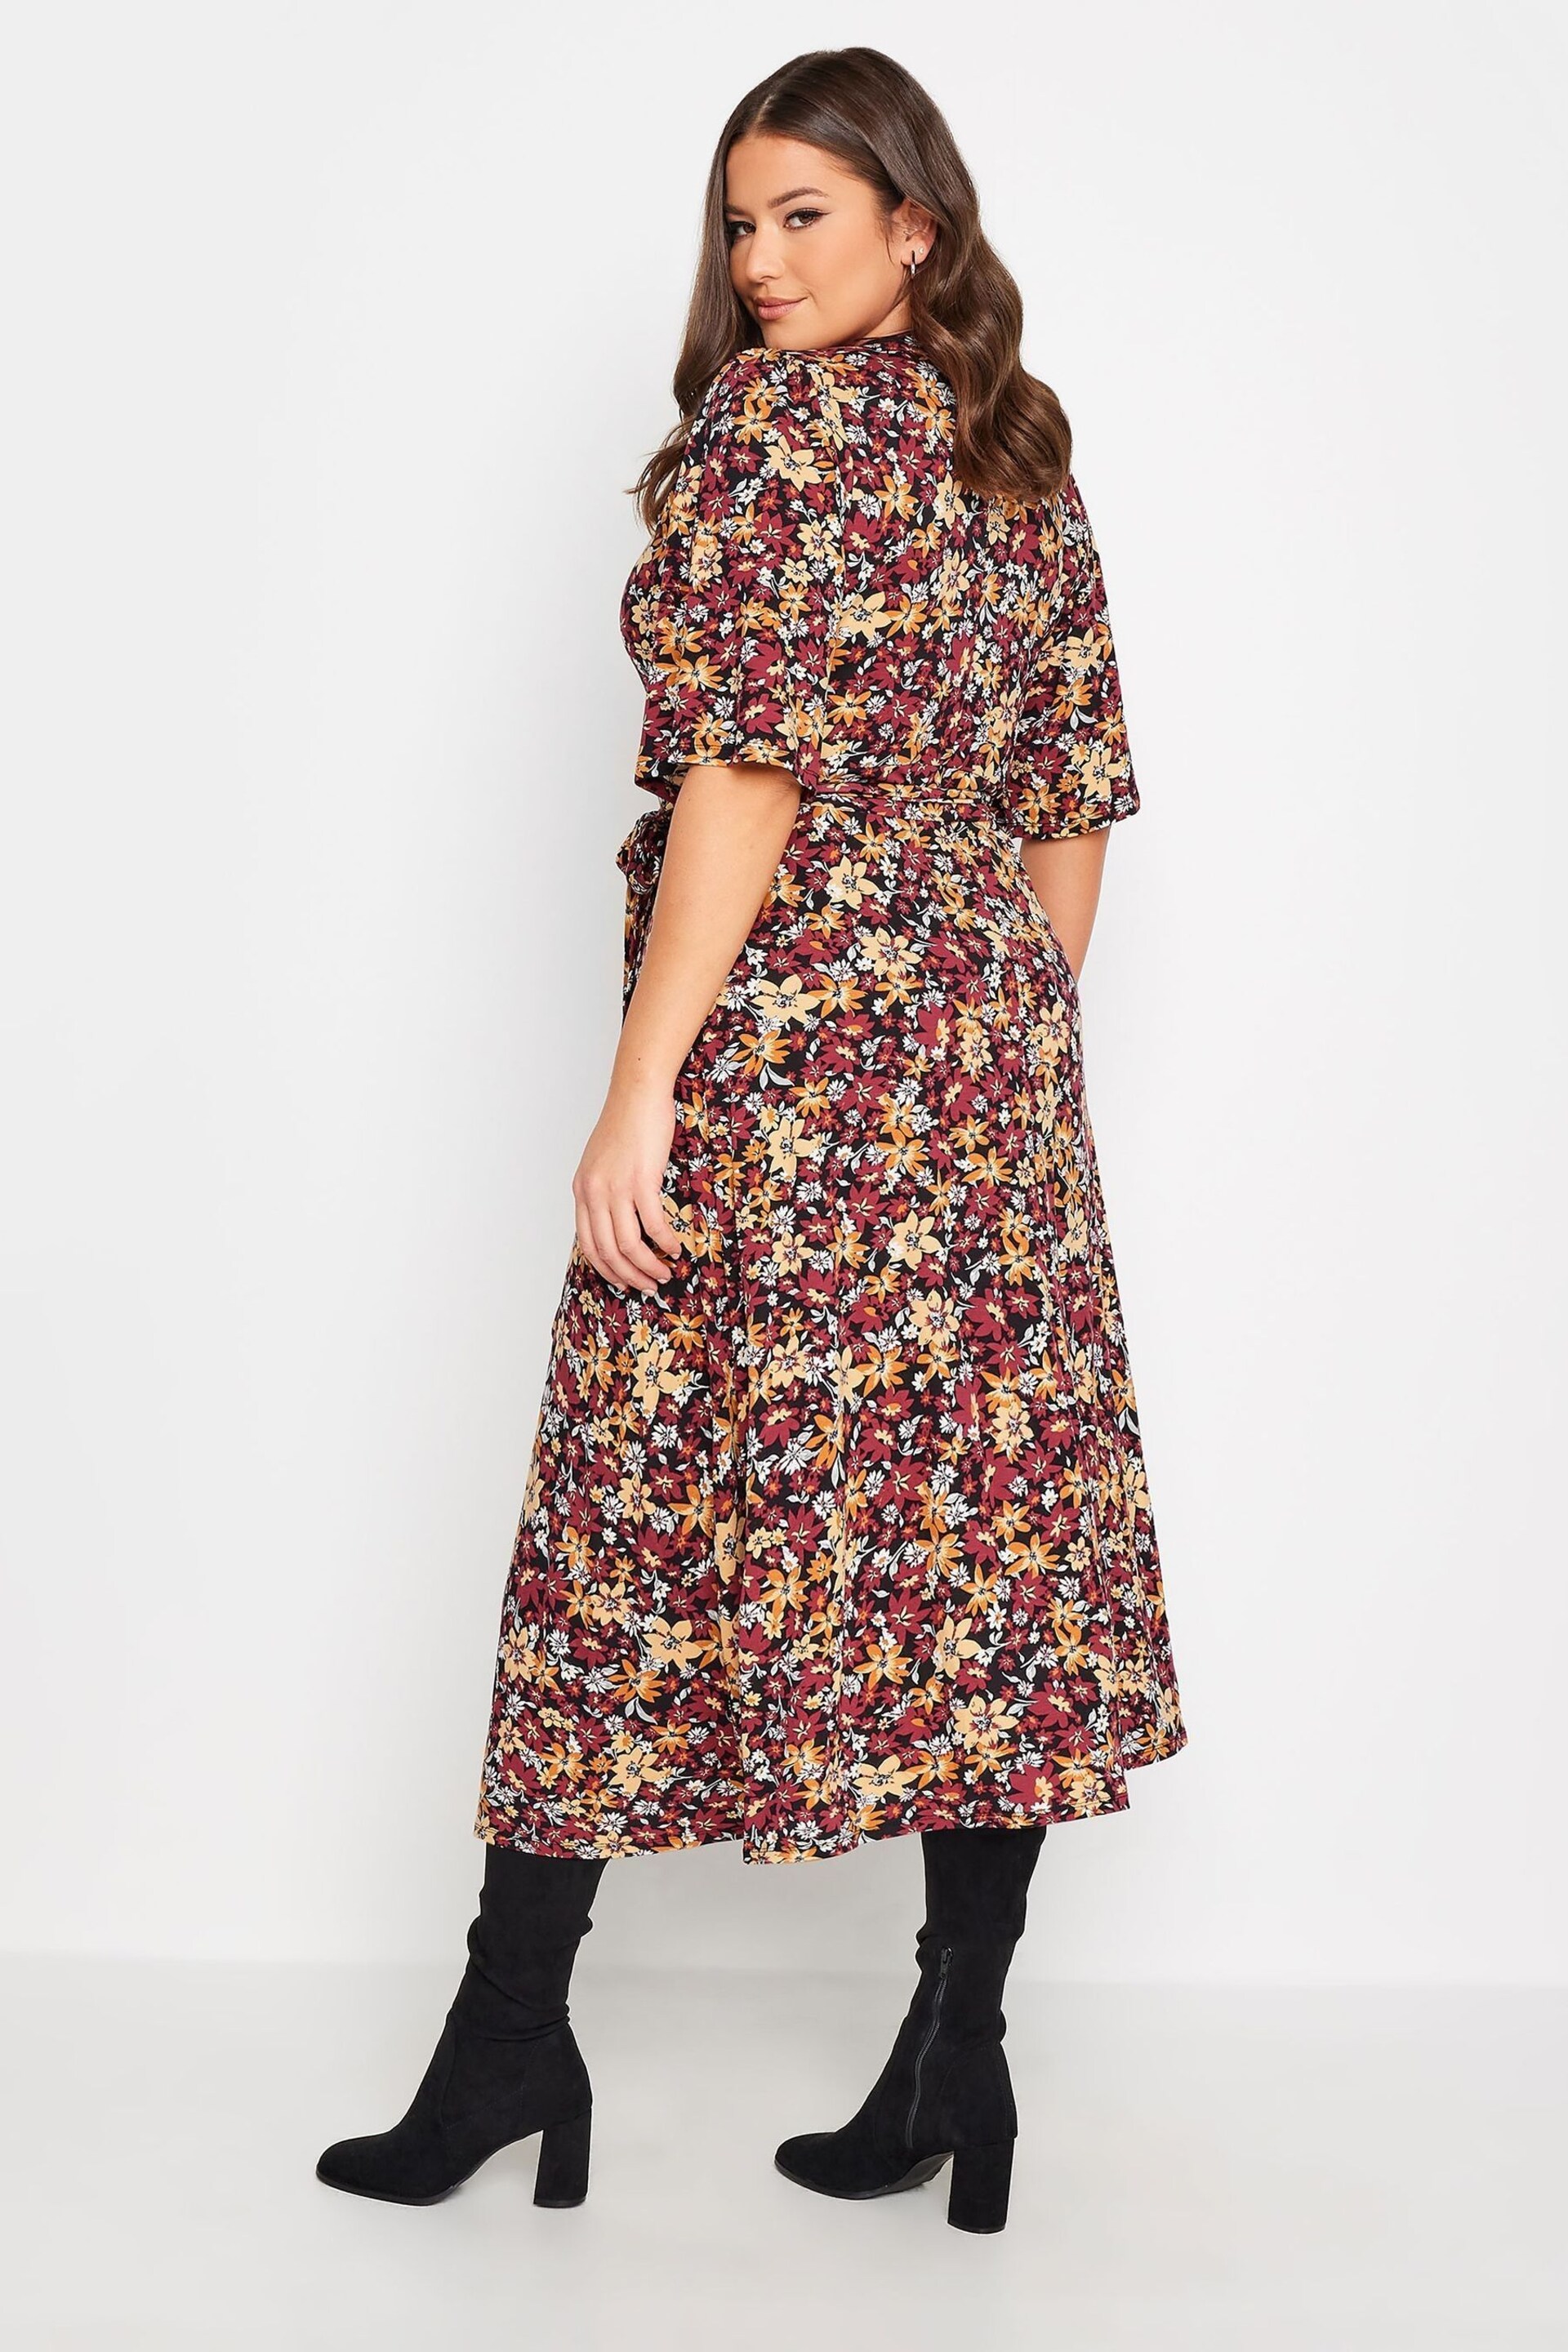 Yours Curve Multi Red Floral Maxi Wrap Dress - Image 3 of 4